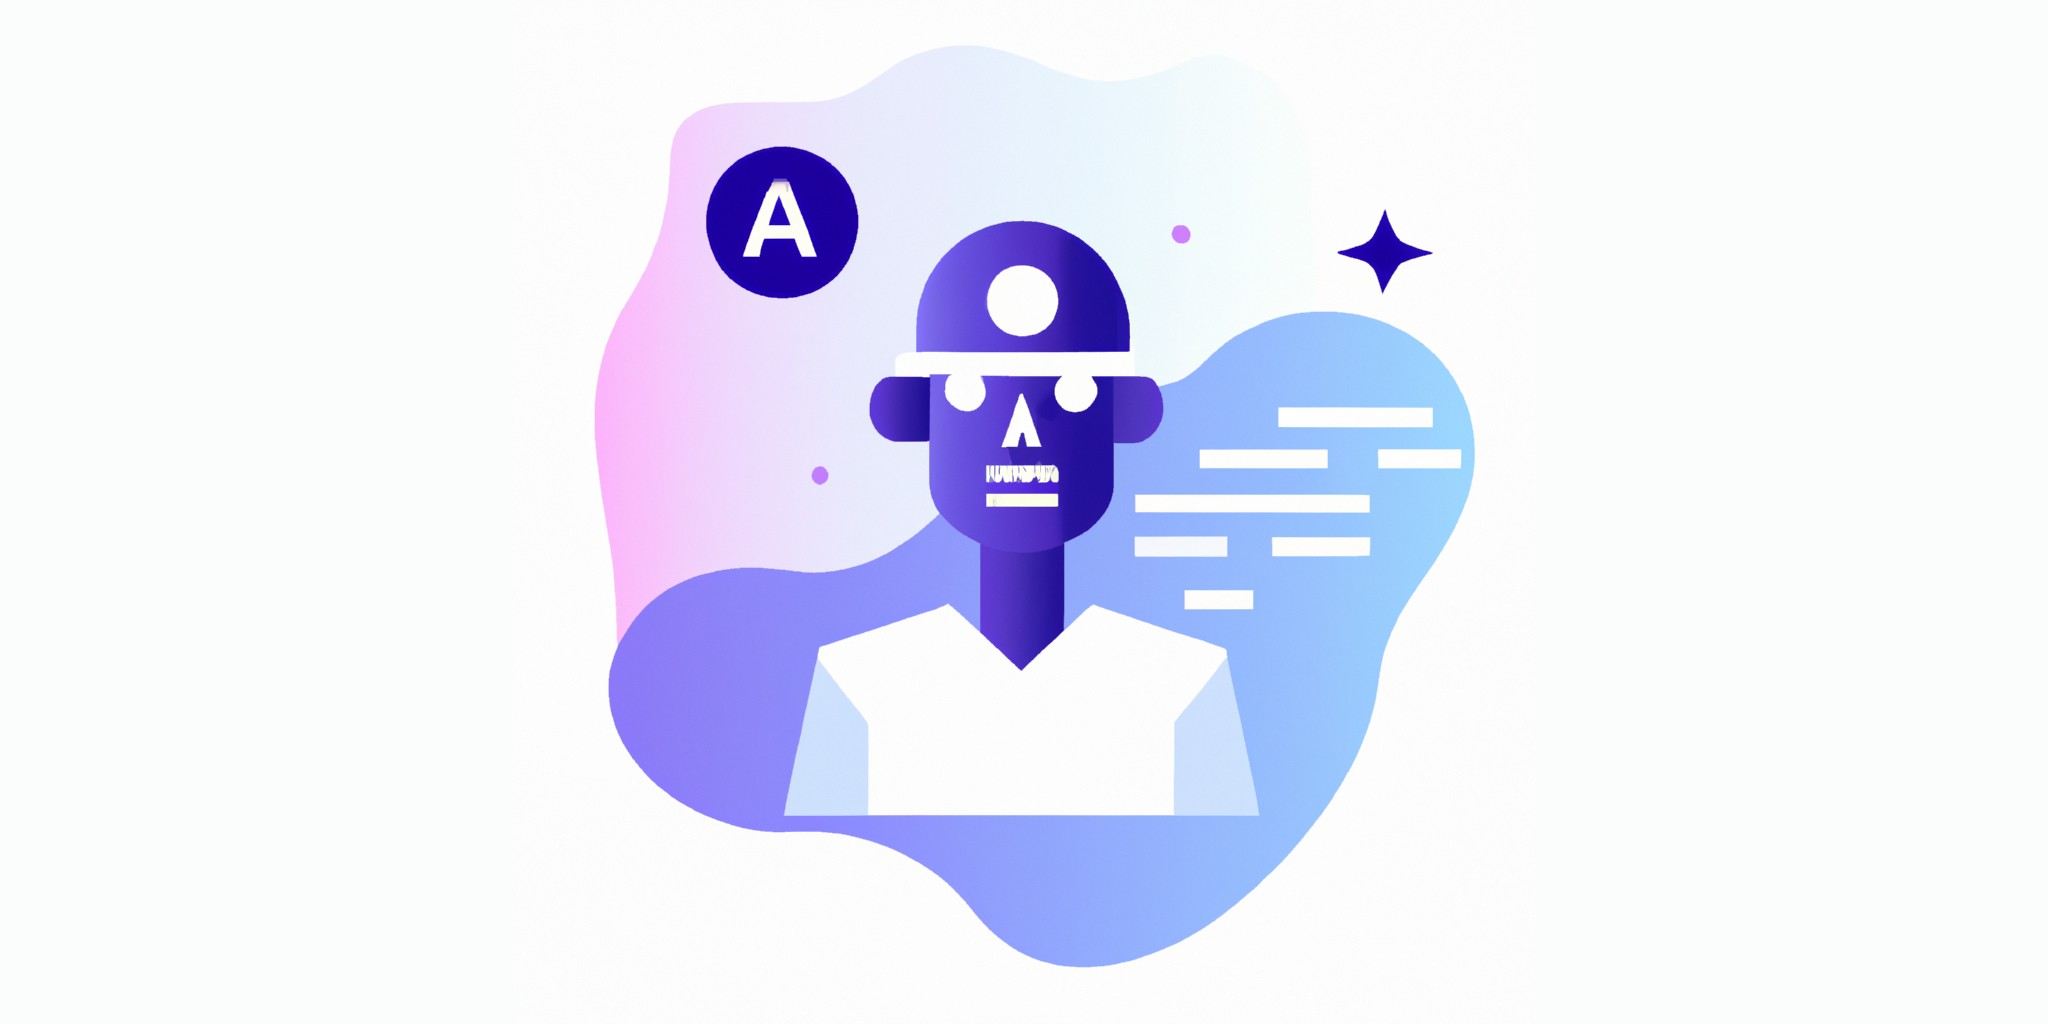 a artificial intelligence in flat illustration style with gradients and white background